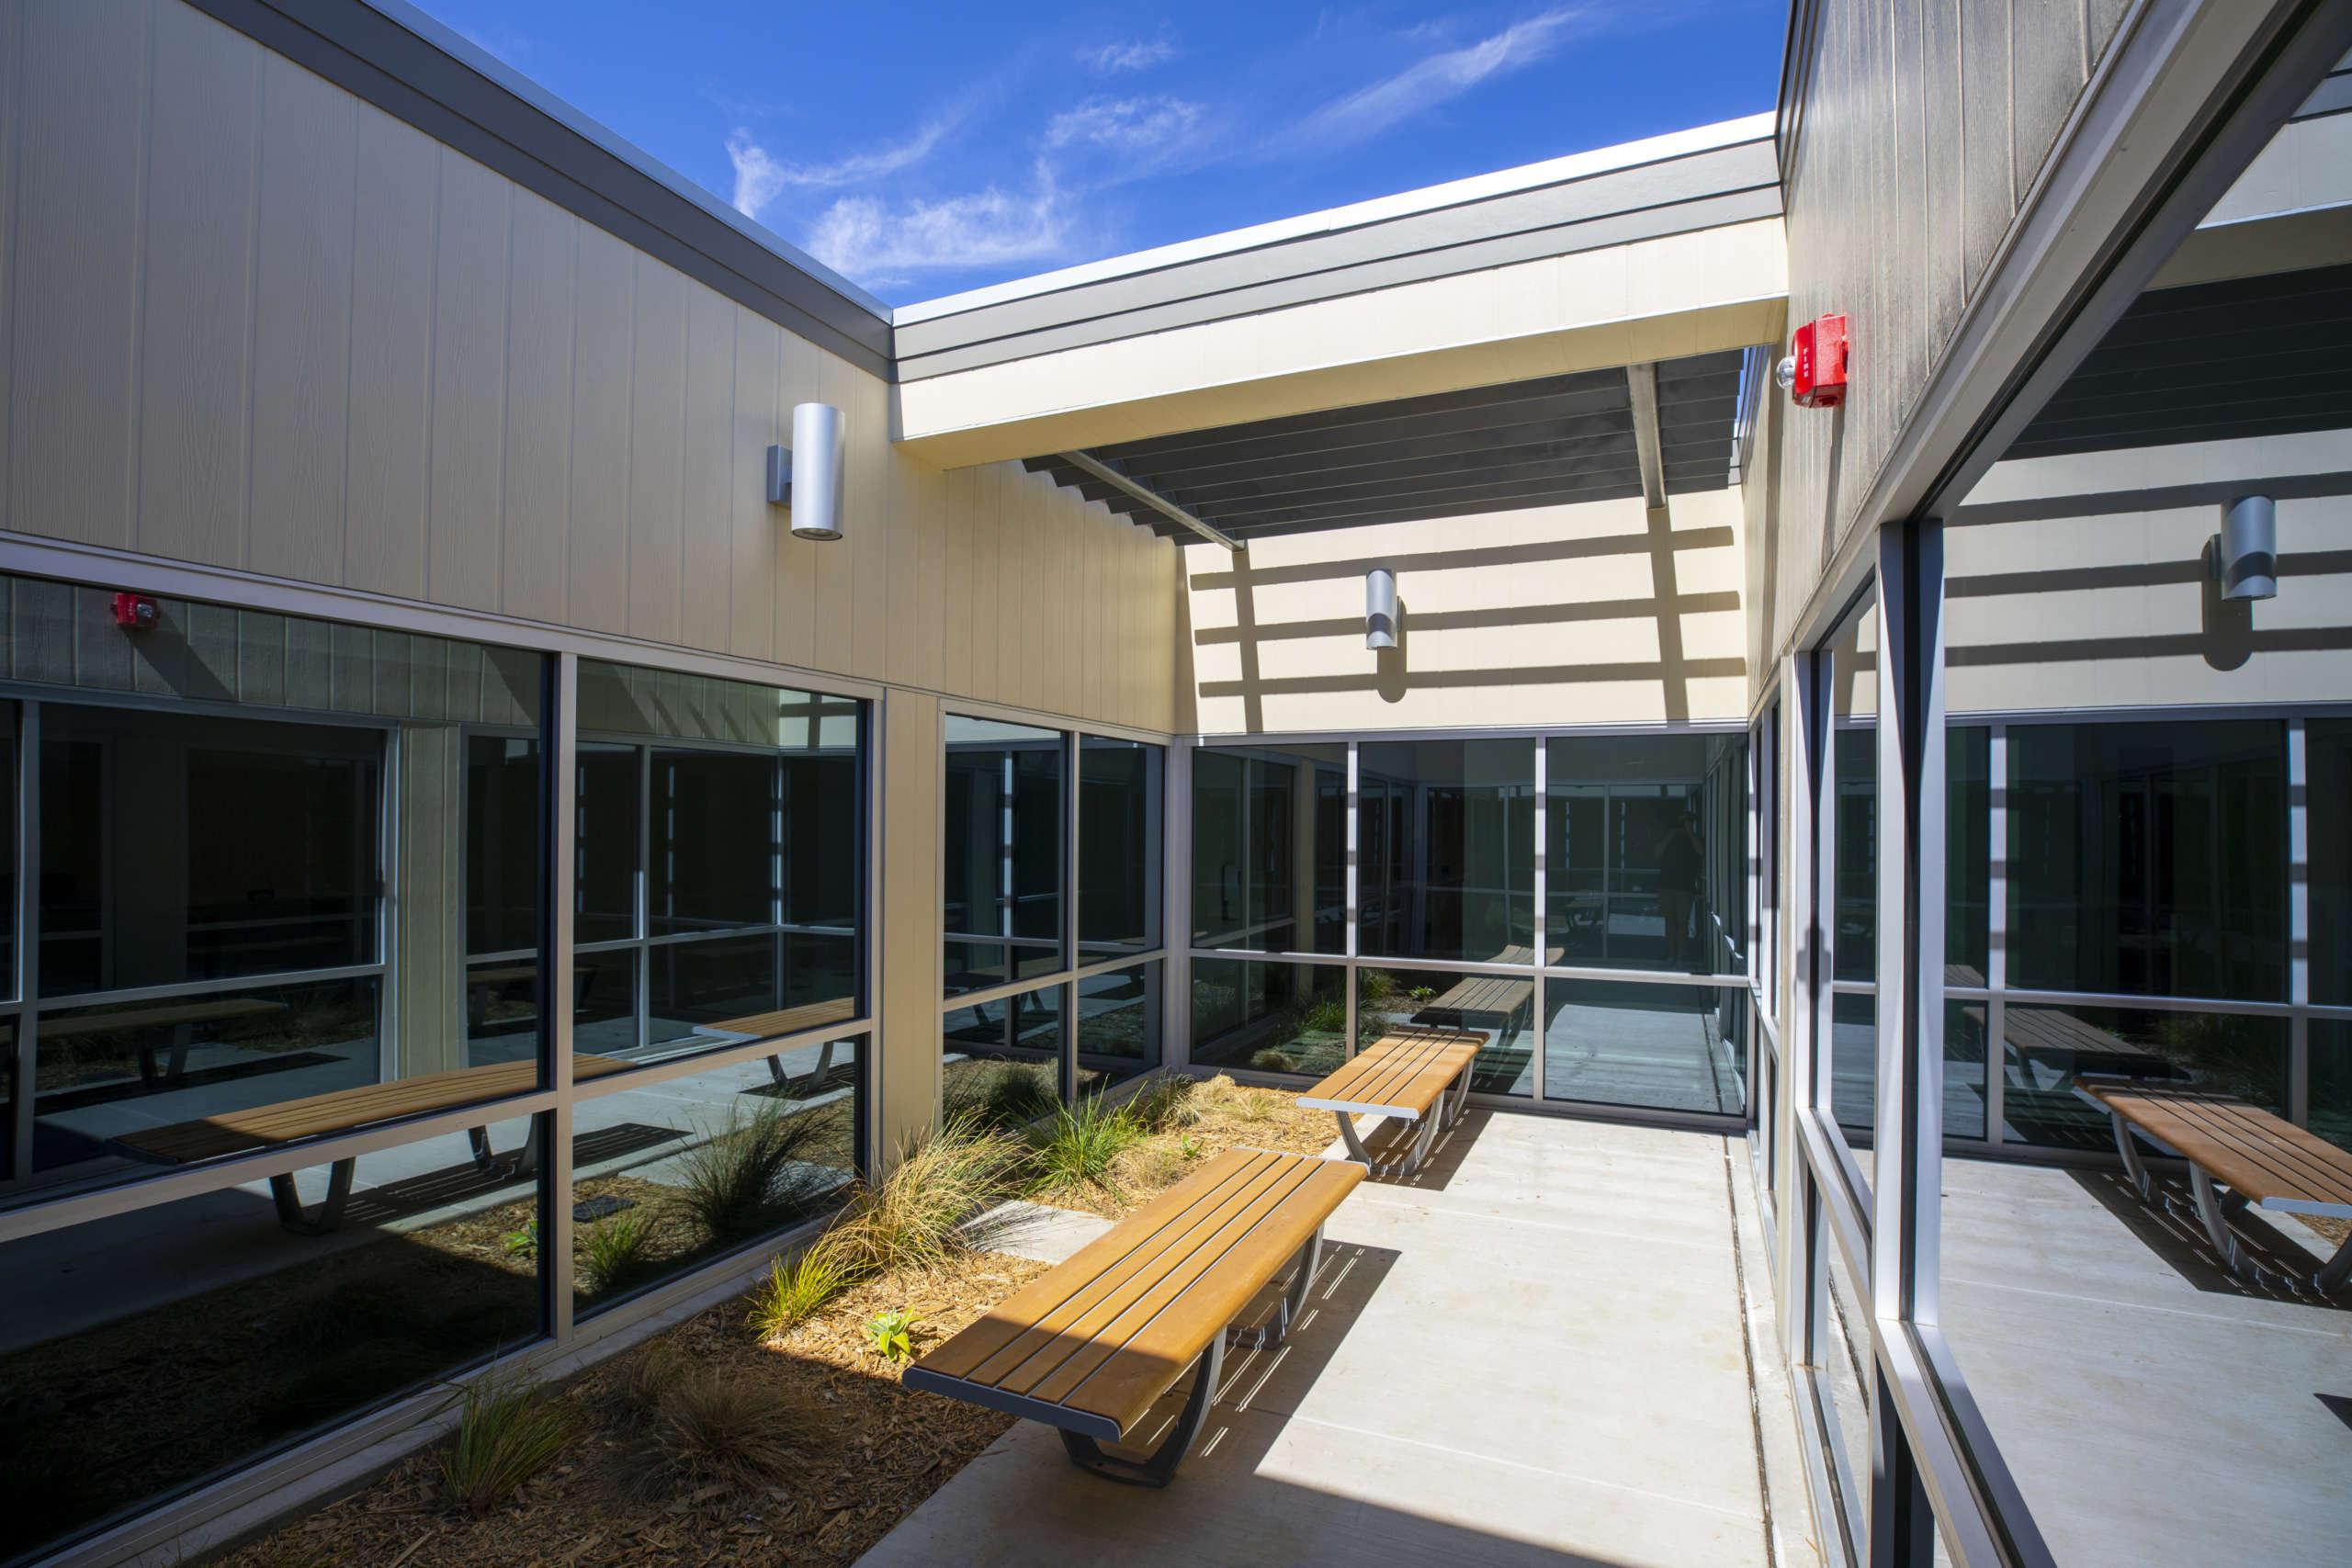 Outdoor area with benches at the Behavioral Health Center of San Benito County